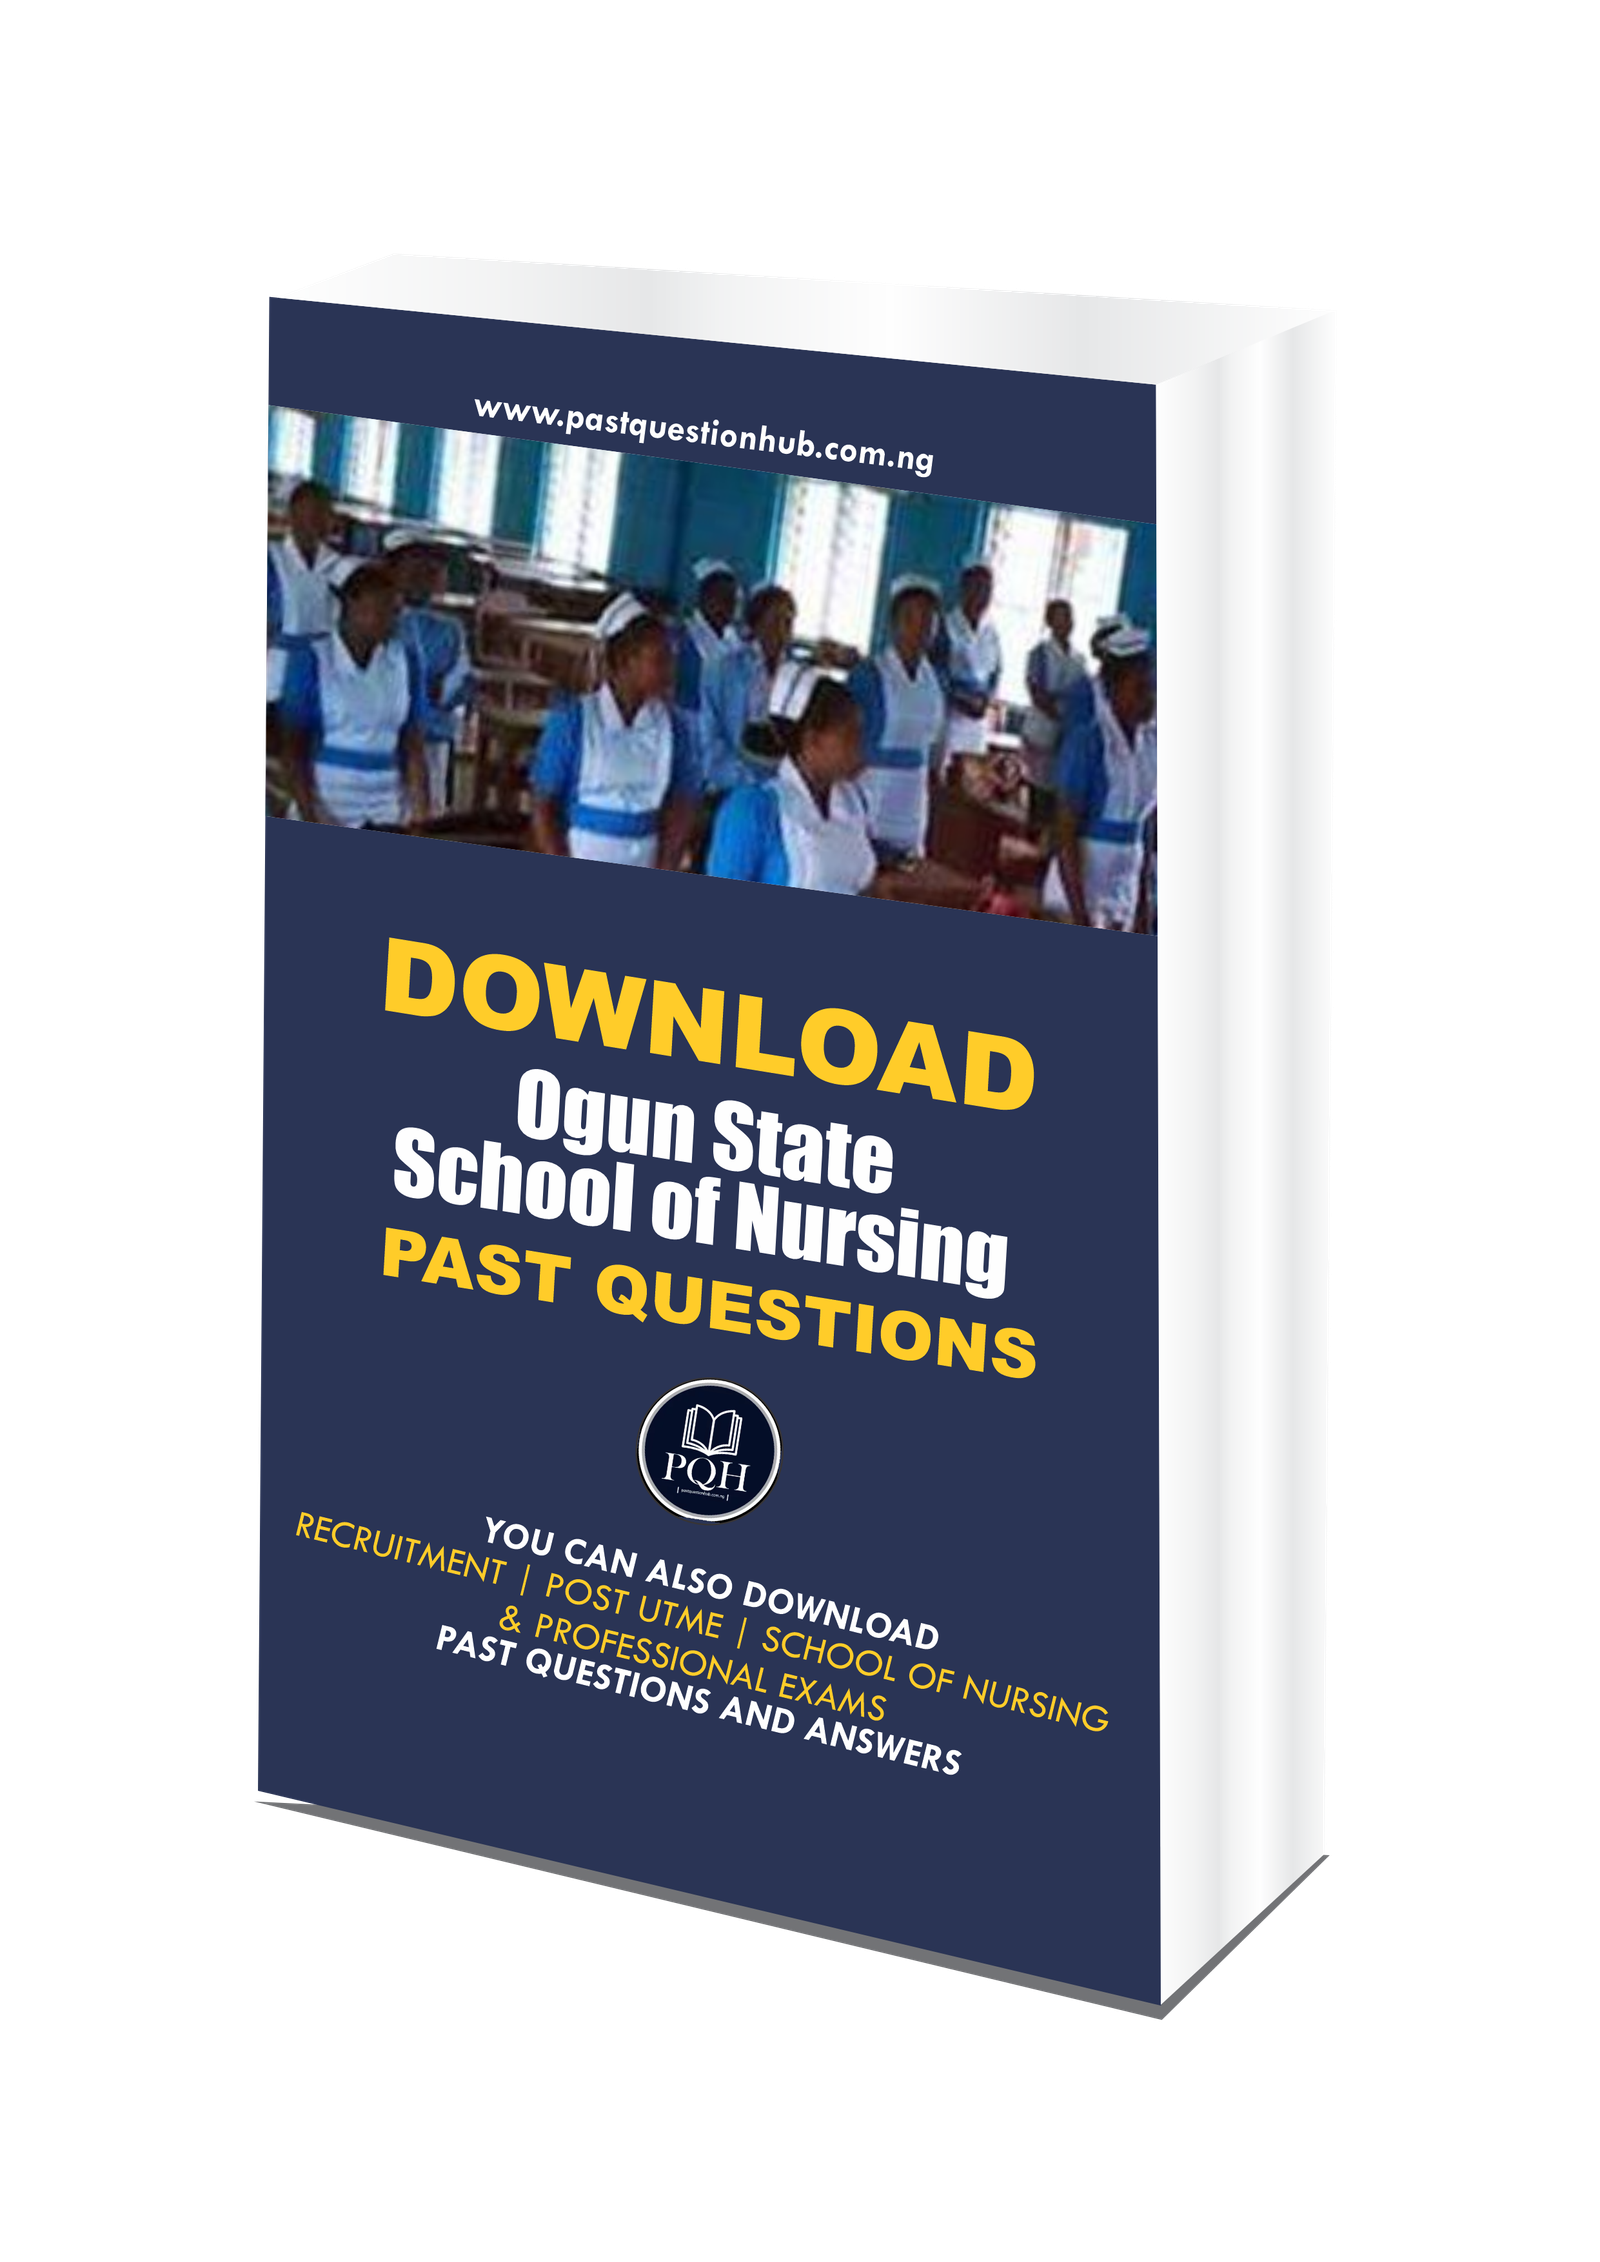 Ogun State School of Nursing Past Questions and Answers PDF